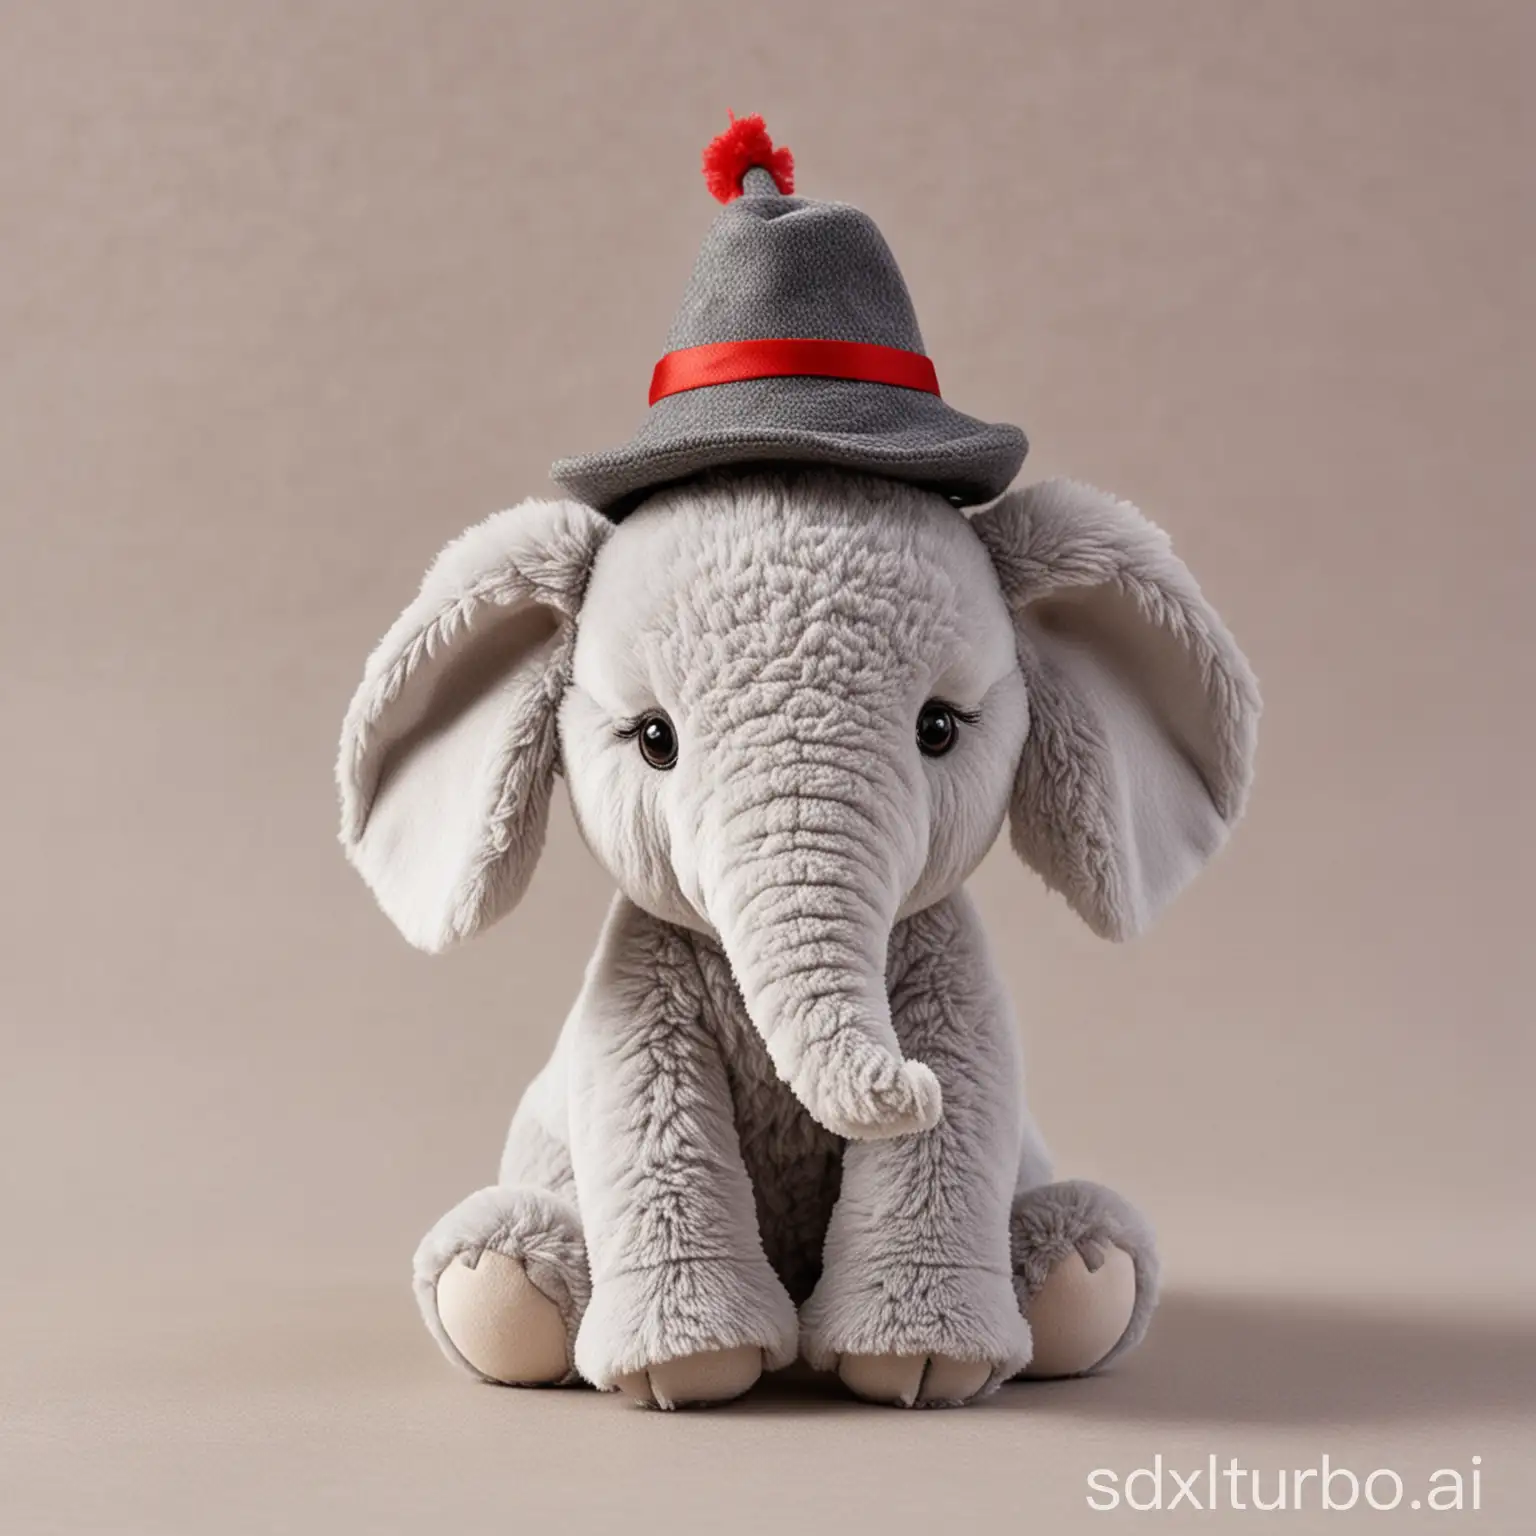 A small plush elephant with a hat